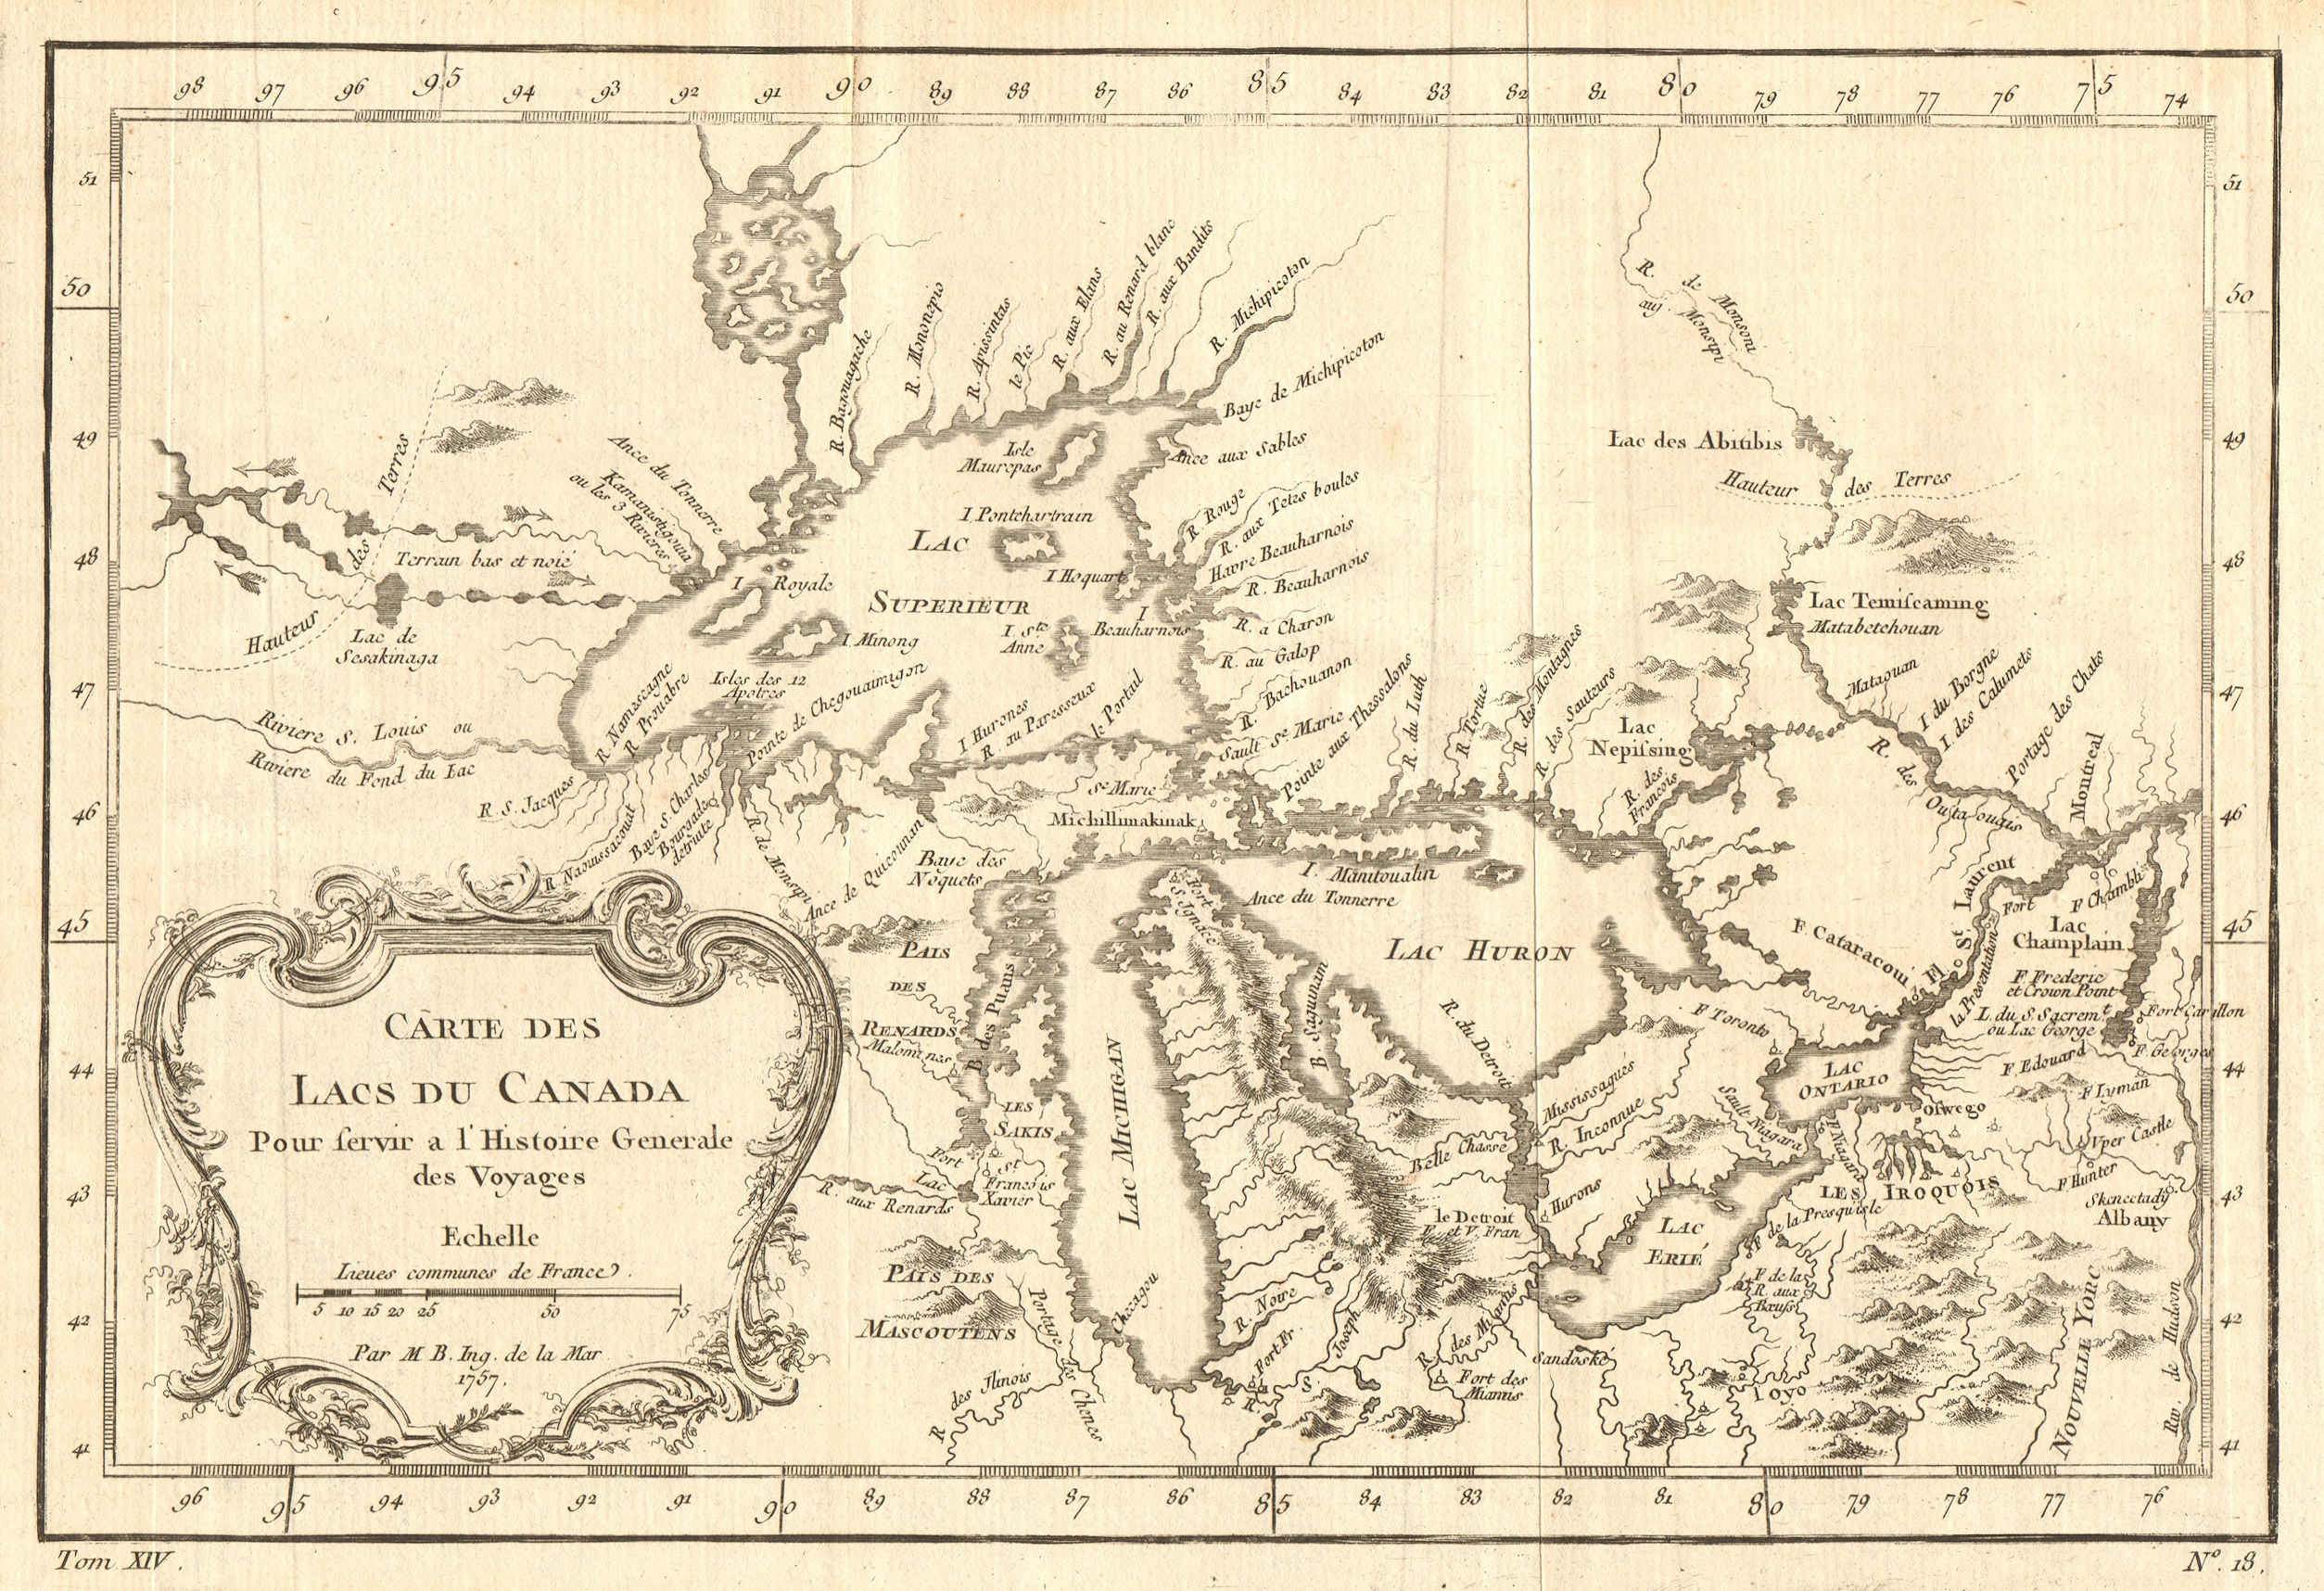 'Cartes des Lac du Canada'. The Great Lakes of North America. BELLIN 1757 map